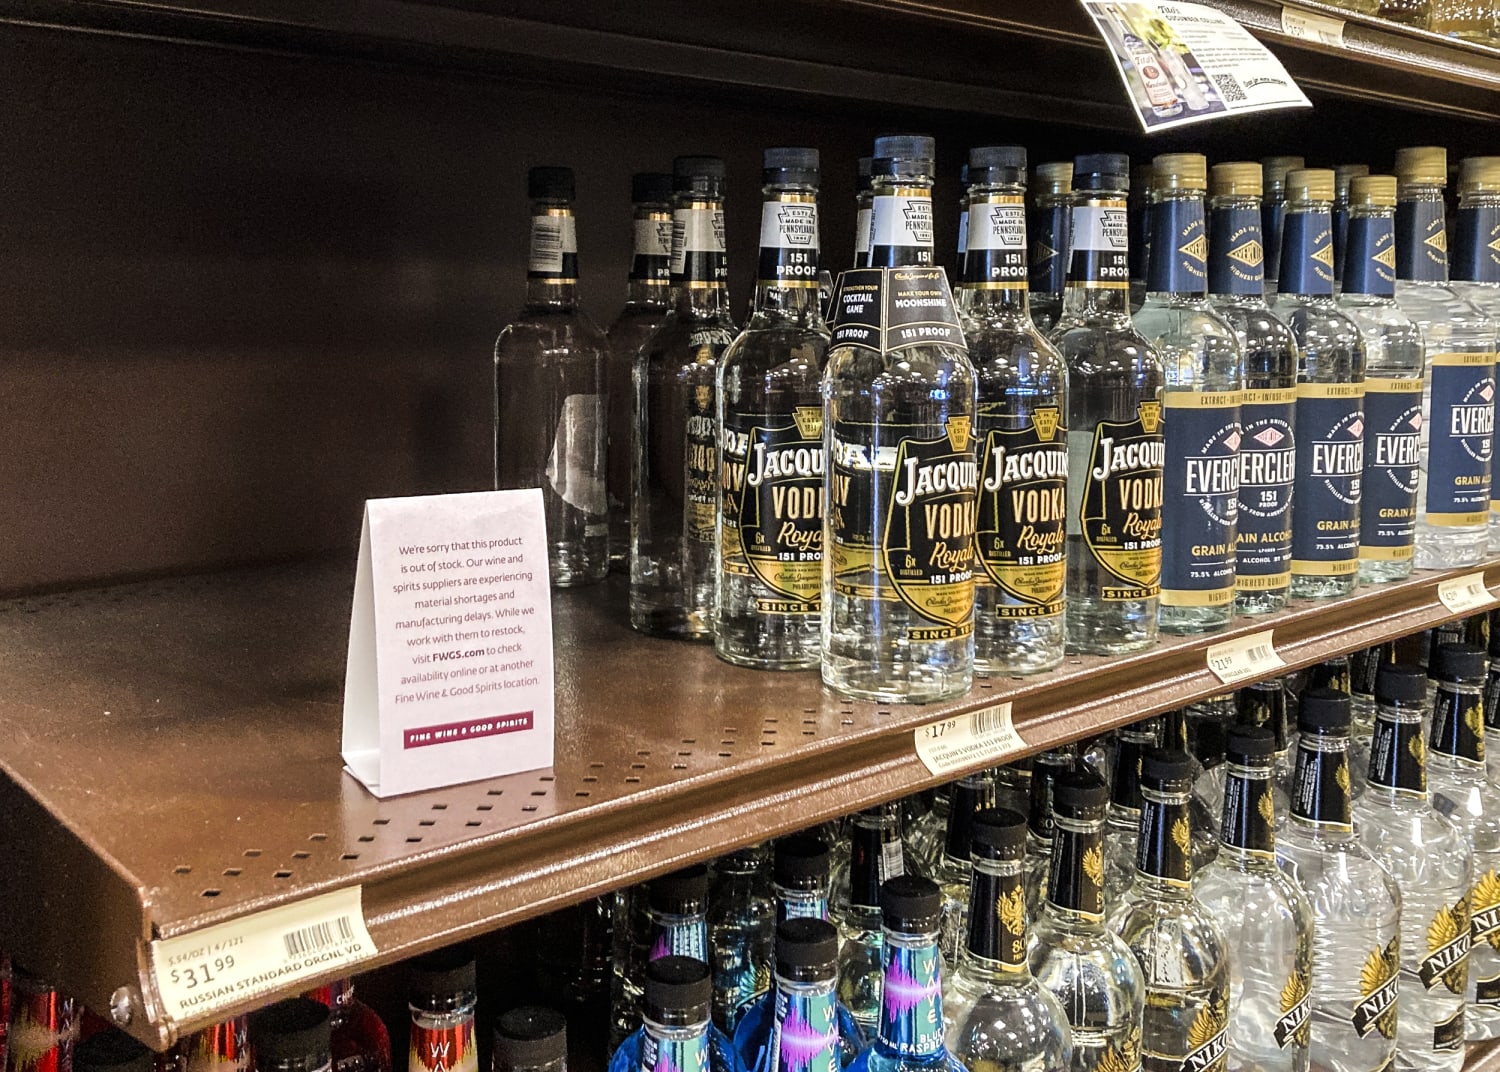 Liquor Stores in Delaware: Navigating Liquor Store Options in the State of Delaware